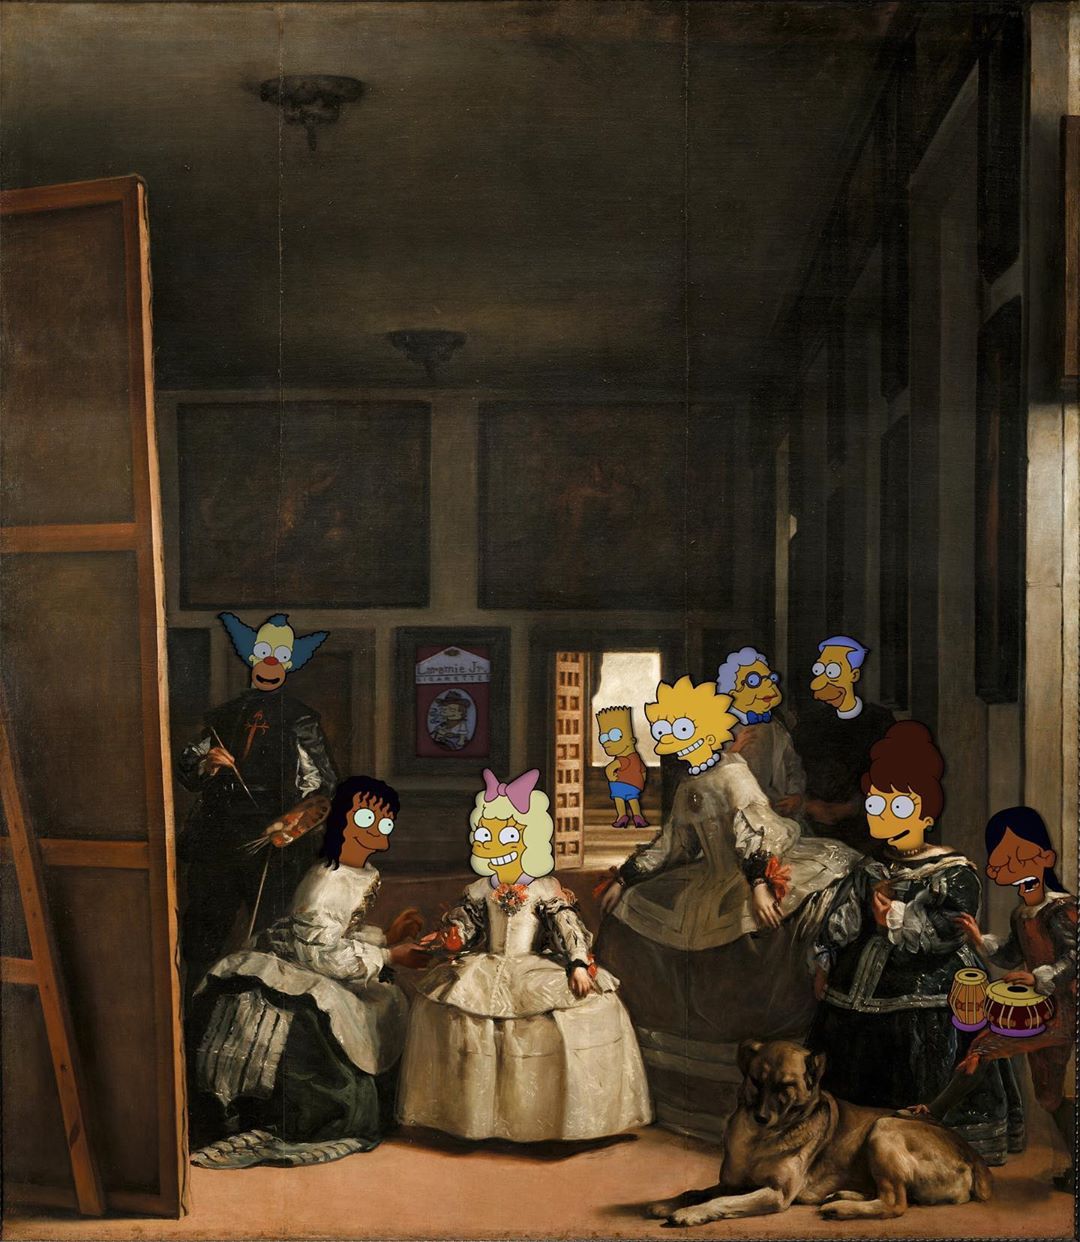 Fine art work but with The Simpsons